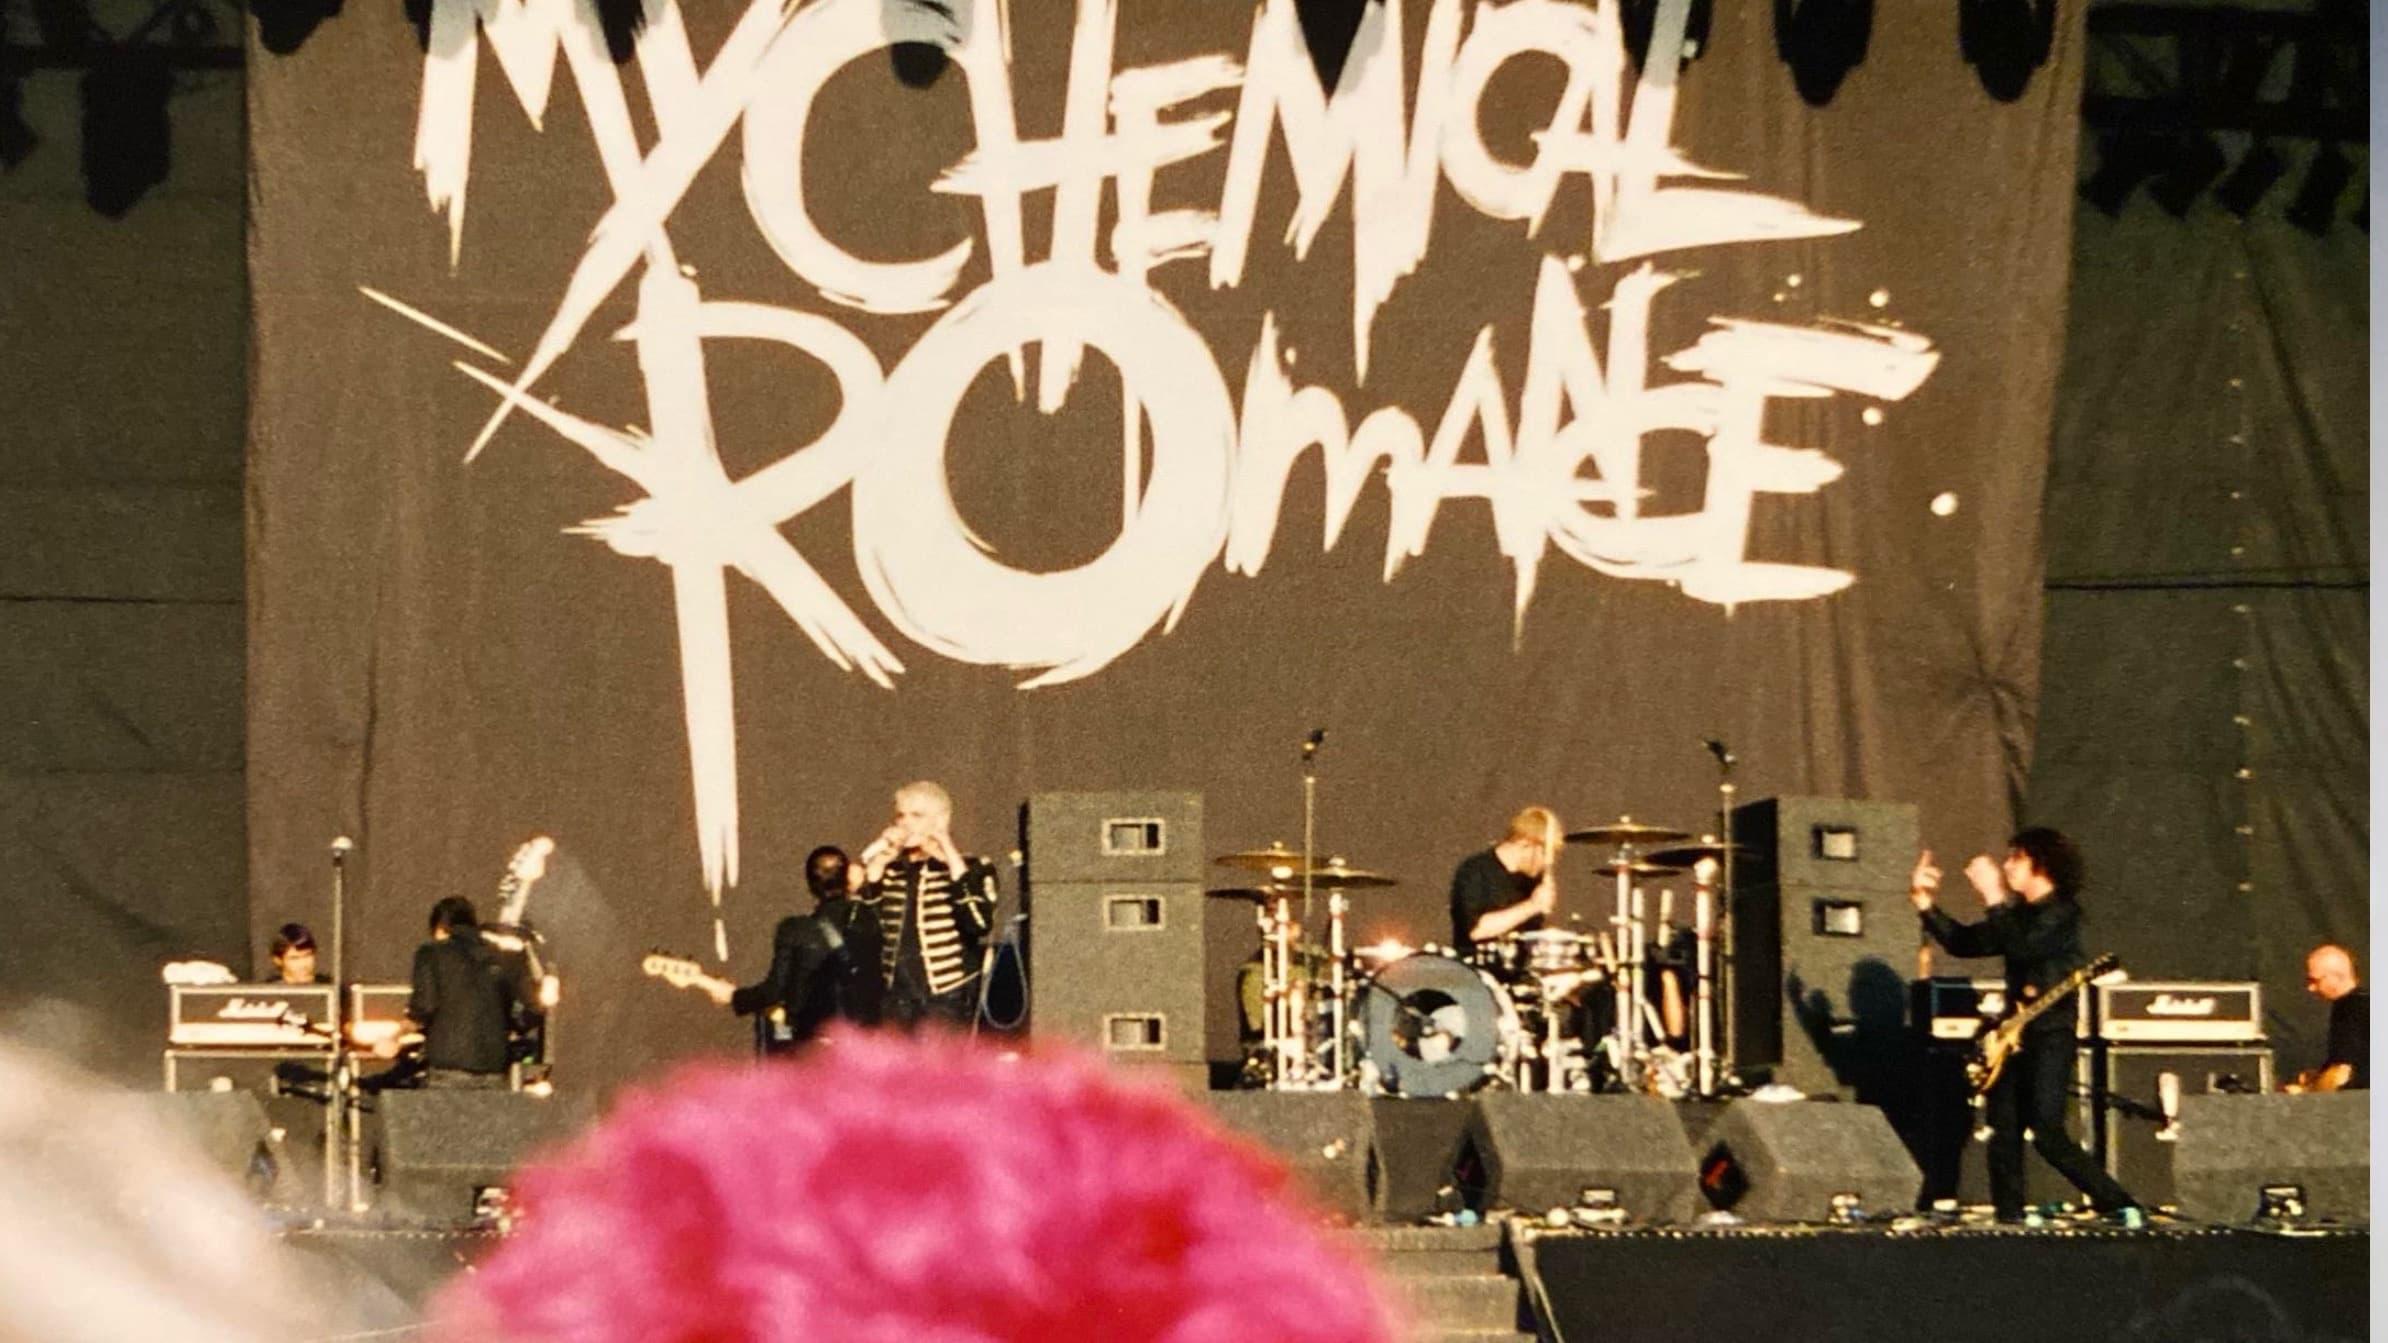 My Chemical Romance Live at Reading Festival 2006 backdrop